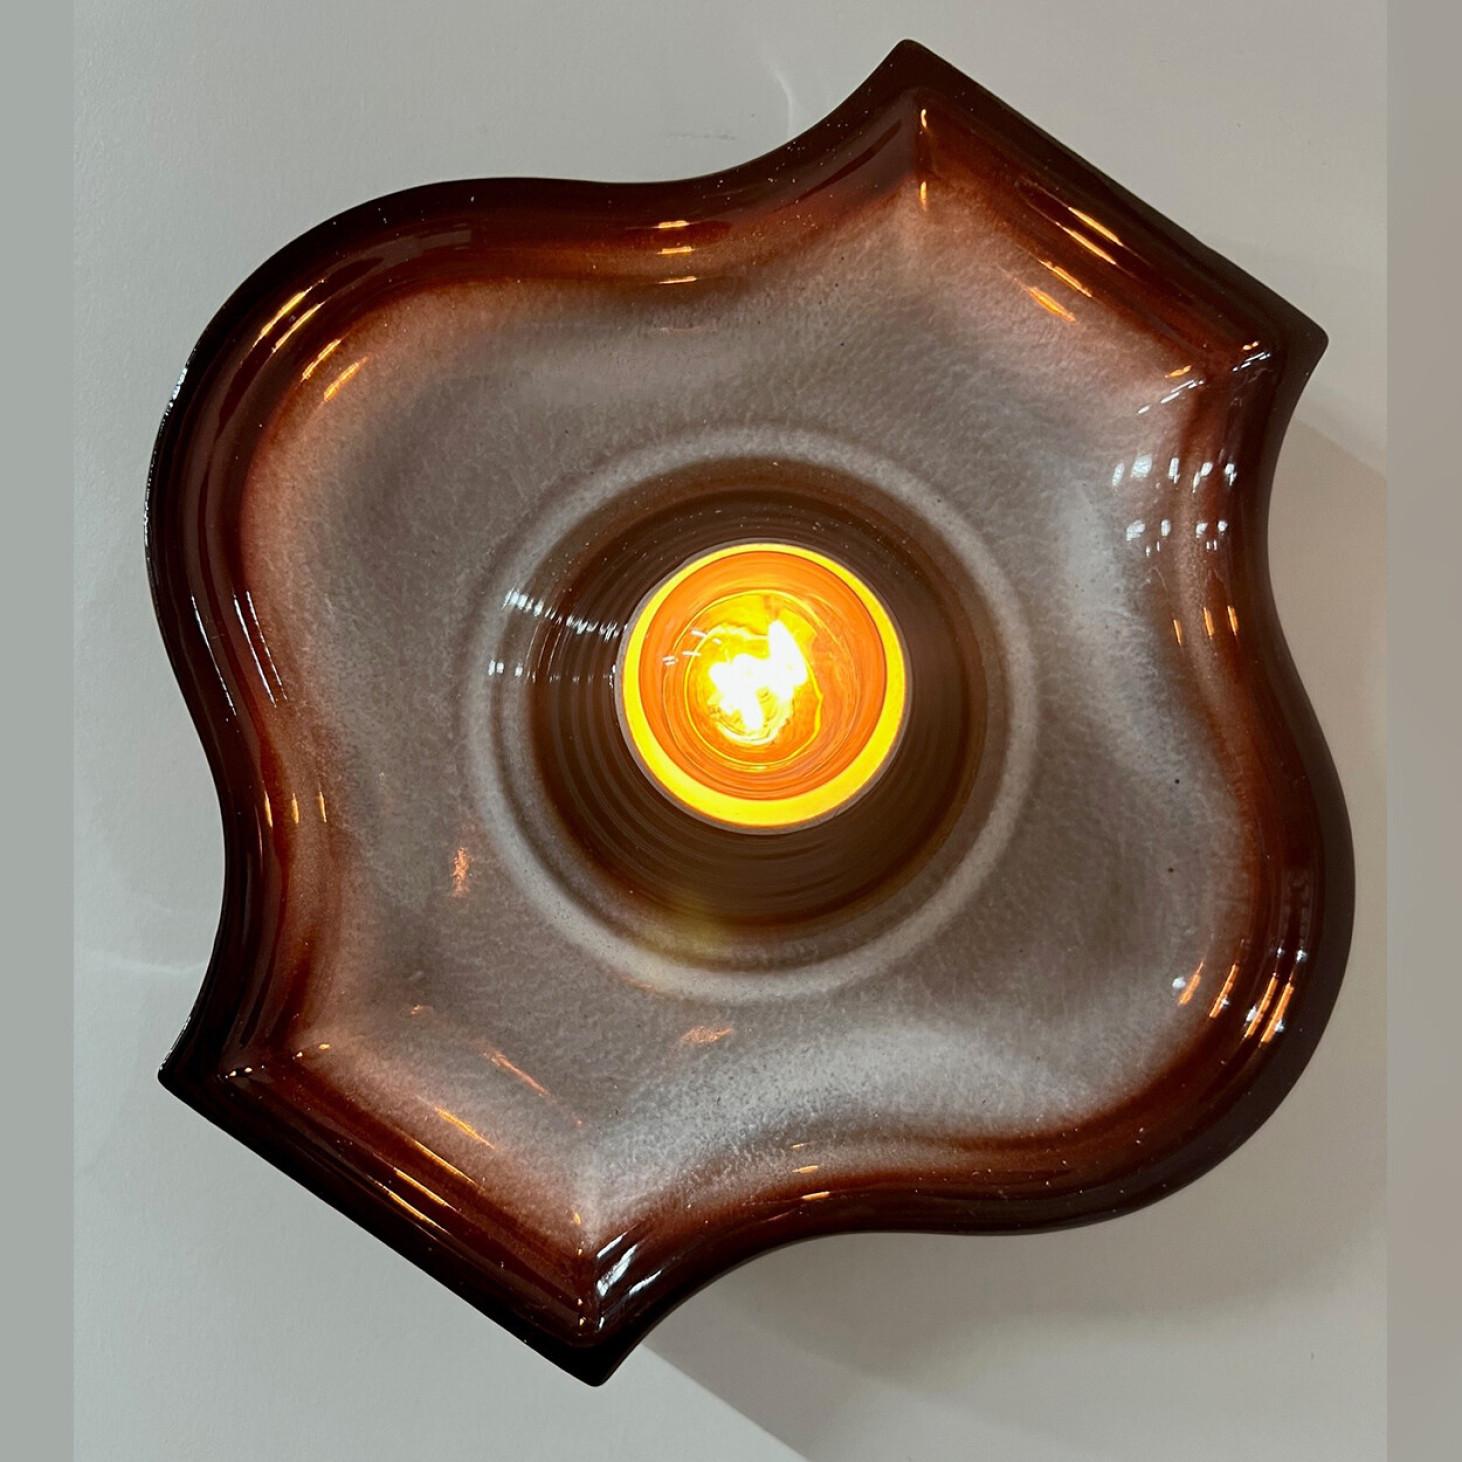 1 of 2 Oval Grey Brown Ceramic Wall Lights by Hustadt Keramik, Germany, 1970 For Sale 2